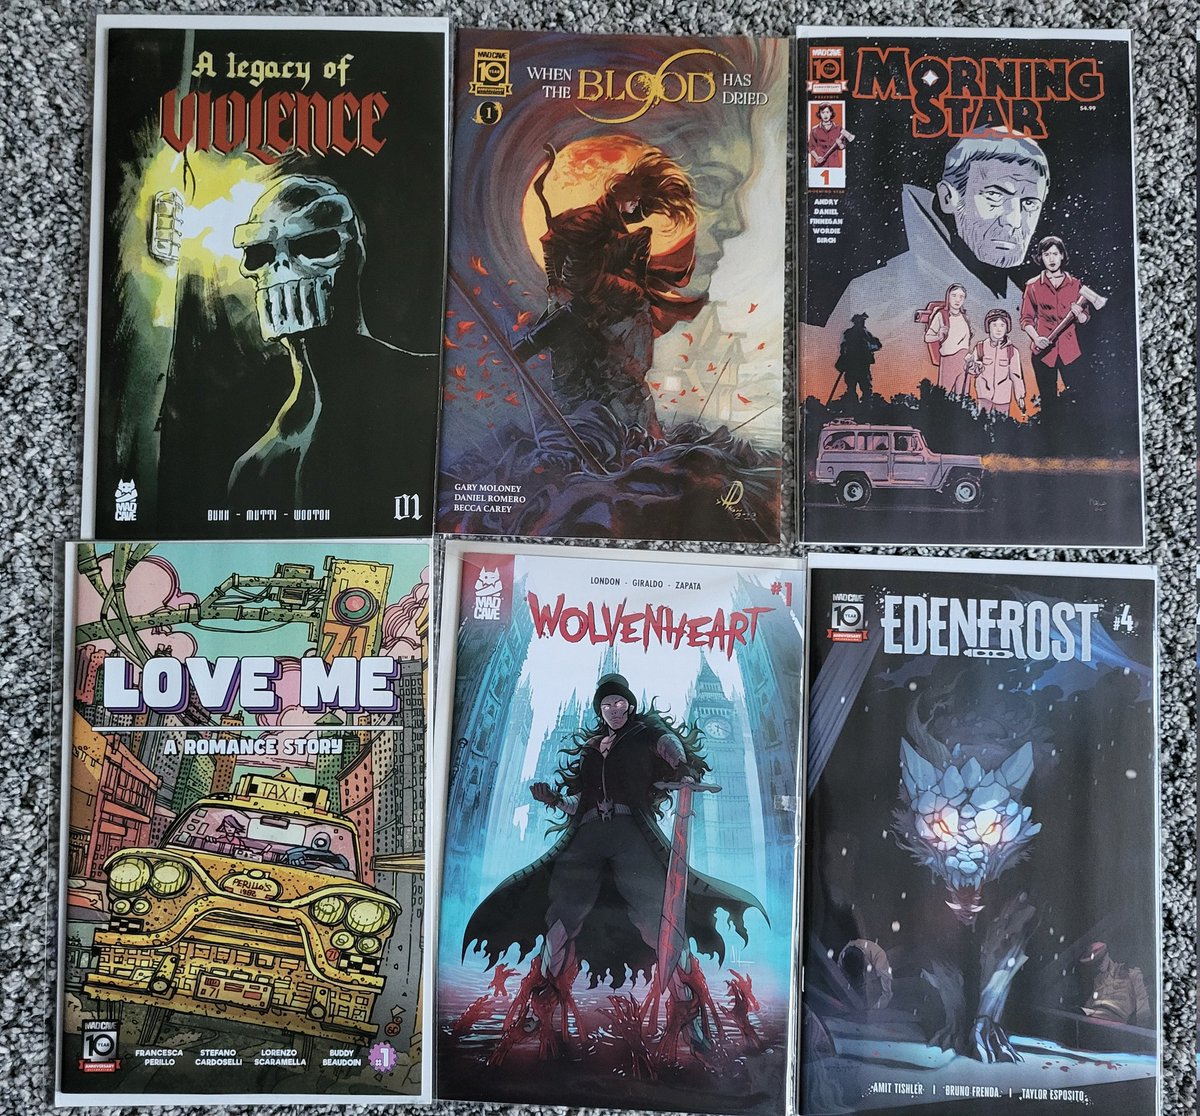 More @MadCaveStudios books for the collection. Need to get a list of their titles so I know what else I need to get for the issue 1s collection...my Mad 1s as I've called them